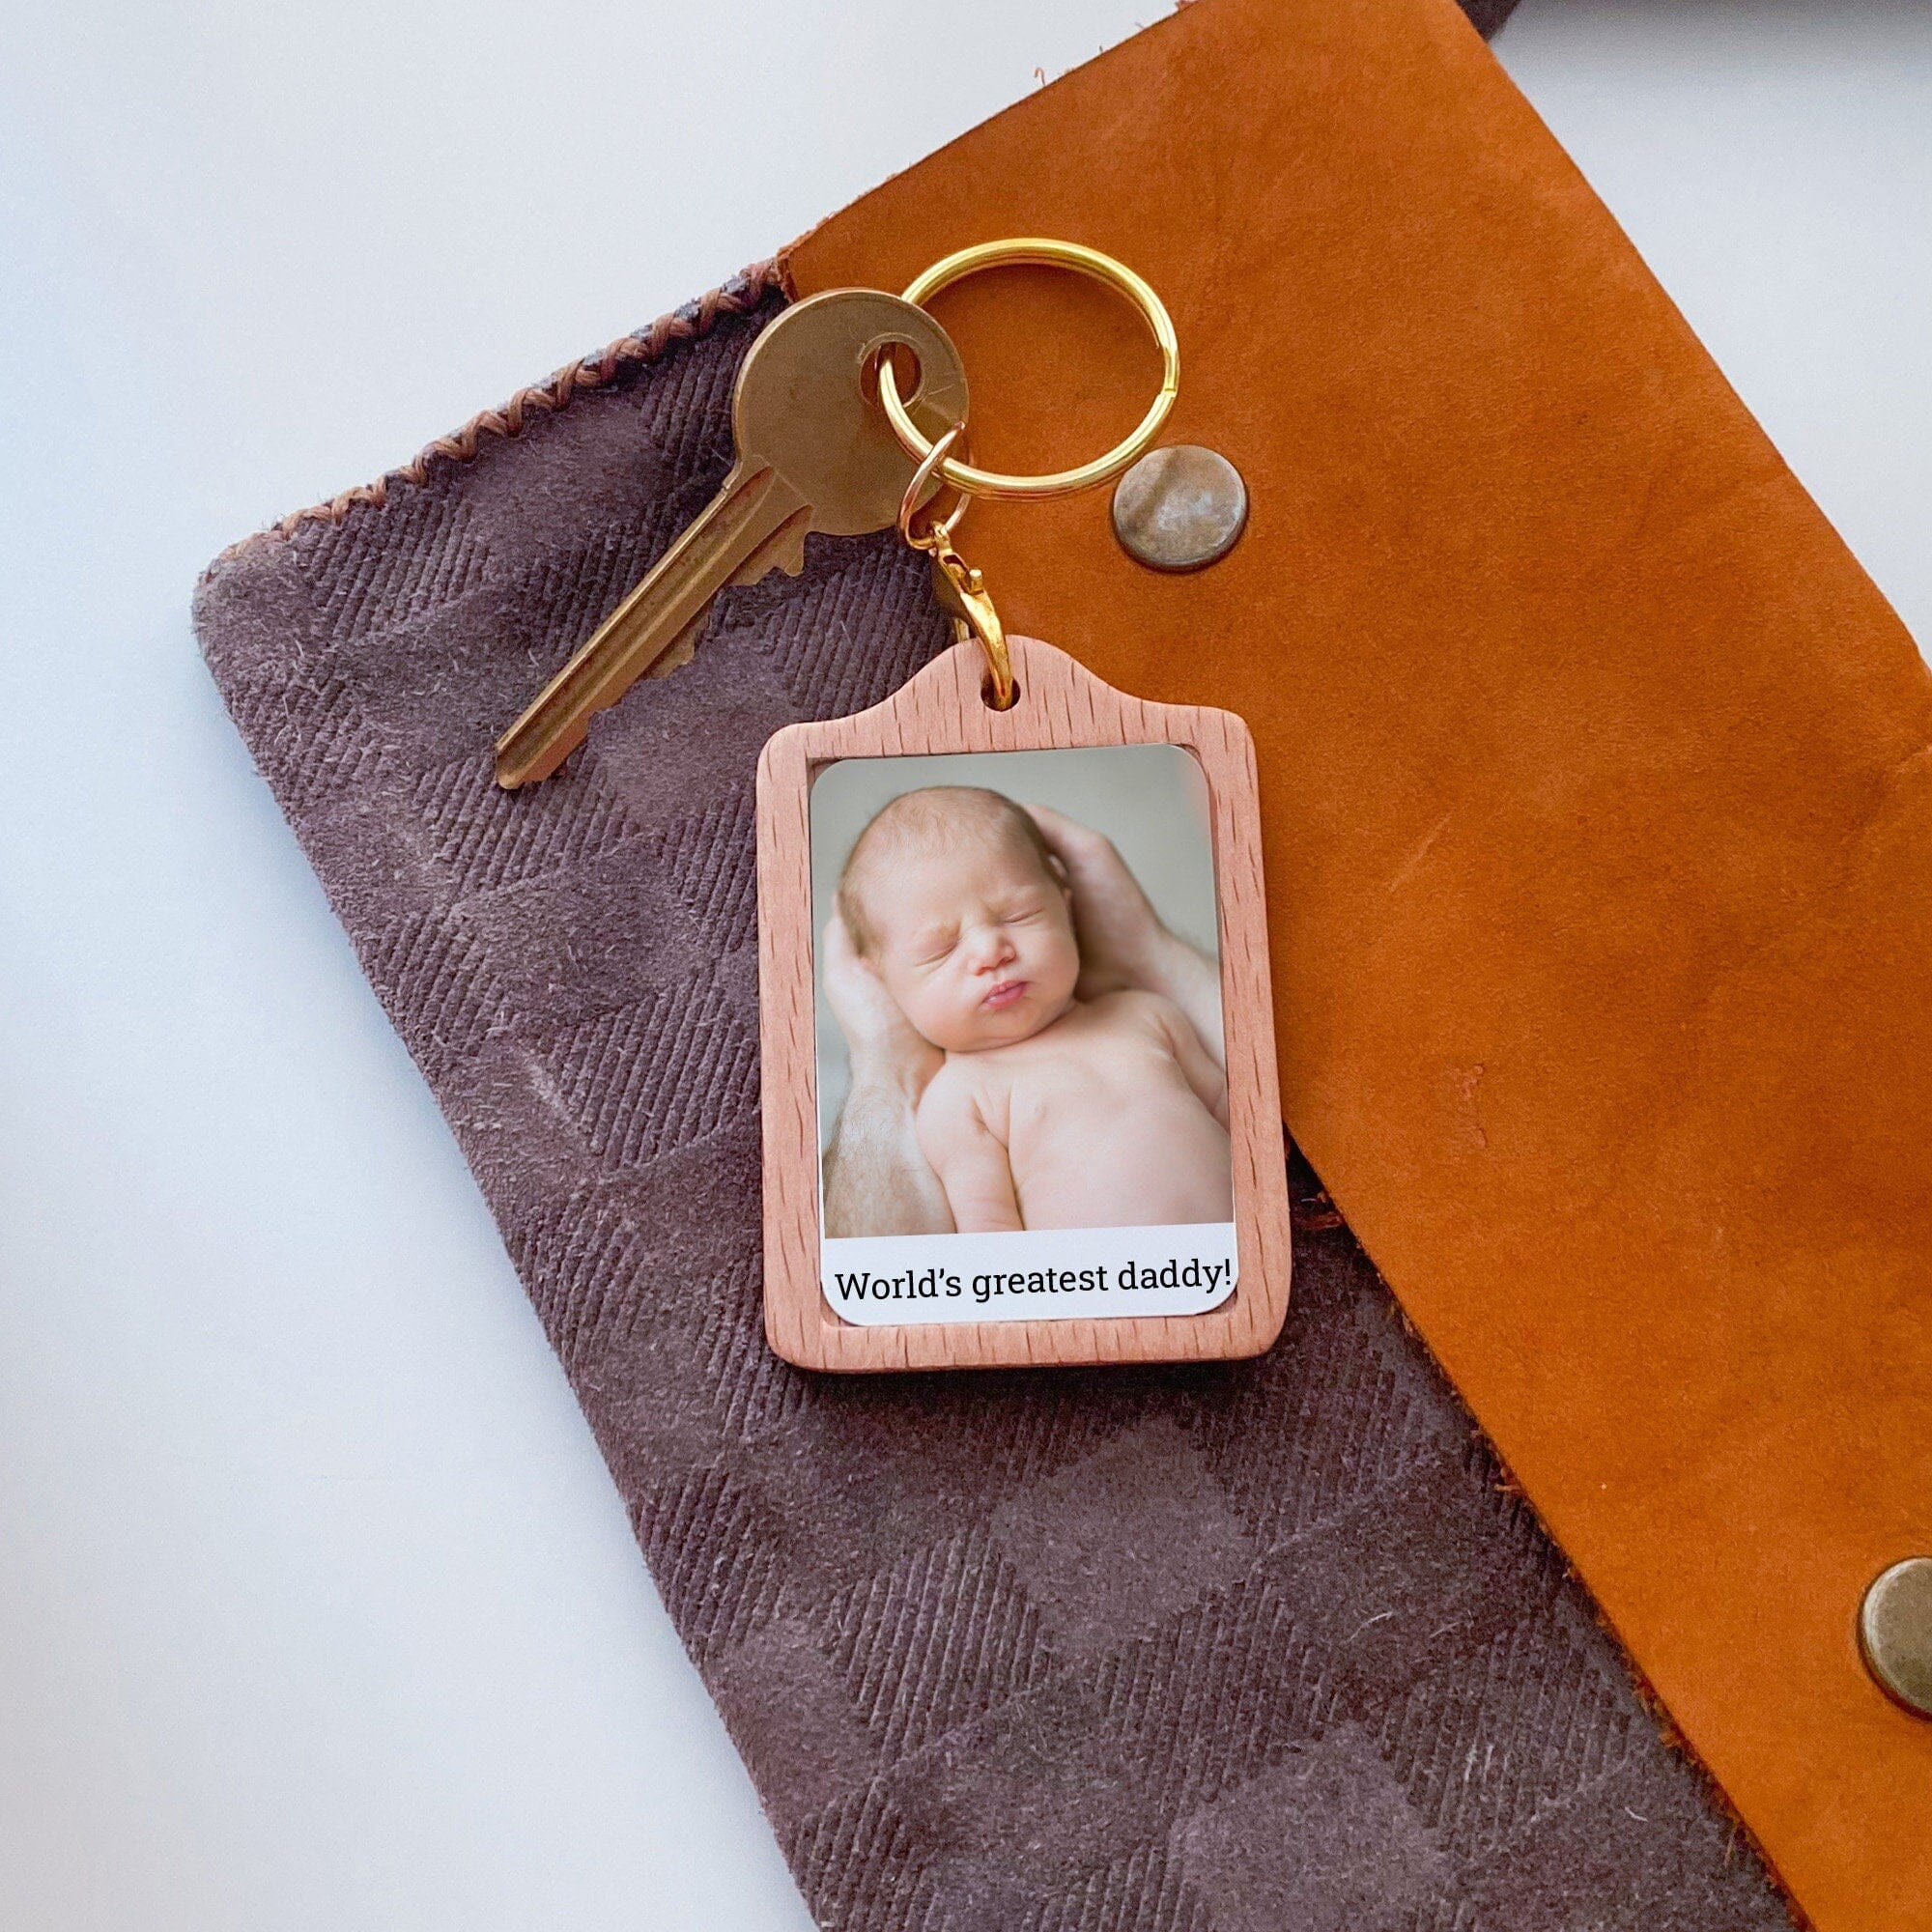 Personalised Wooden Photo Keyring With Text, Gift For Her Wife Husband, Christmas Valentine'S Day Wedding Couple Gift